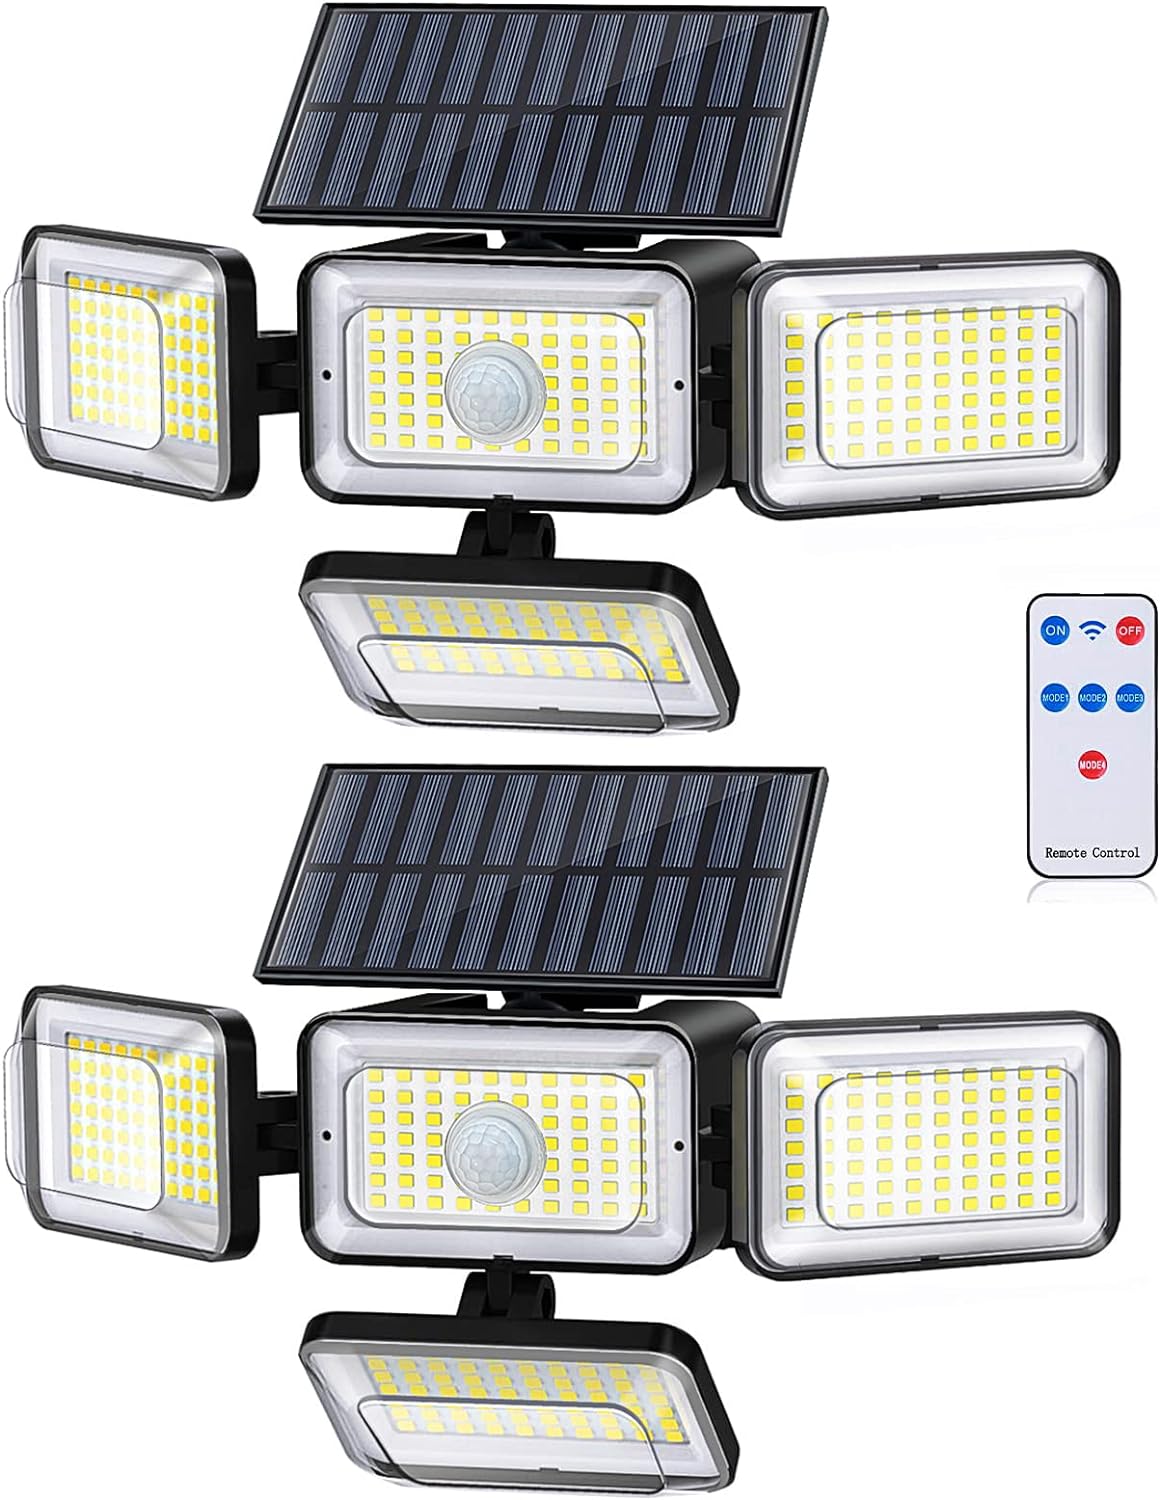 TWO PACK of 4-Panel Adjustable Remote Motion Activated Motion Sensor Solar Waterproof Outdoor Lights - Incredibly bright with multiple modes, including a very unique security flash mode. Whether you are simply using these to light your way when arriving home, or to ensure your home is more secure, these very high end solar lights will be an amazing addition. SEE ADDITIONAL VIDEO BELOW - Order 2 or more 2-packs and SHIPPING IS FREE!